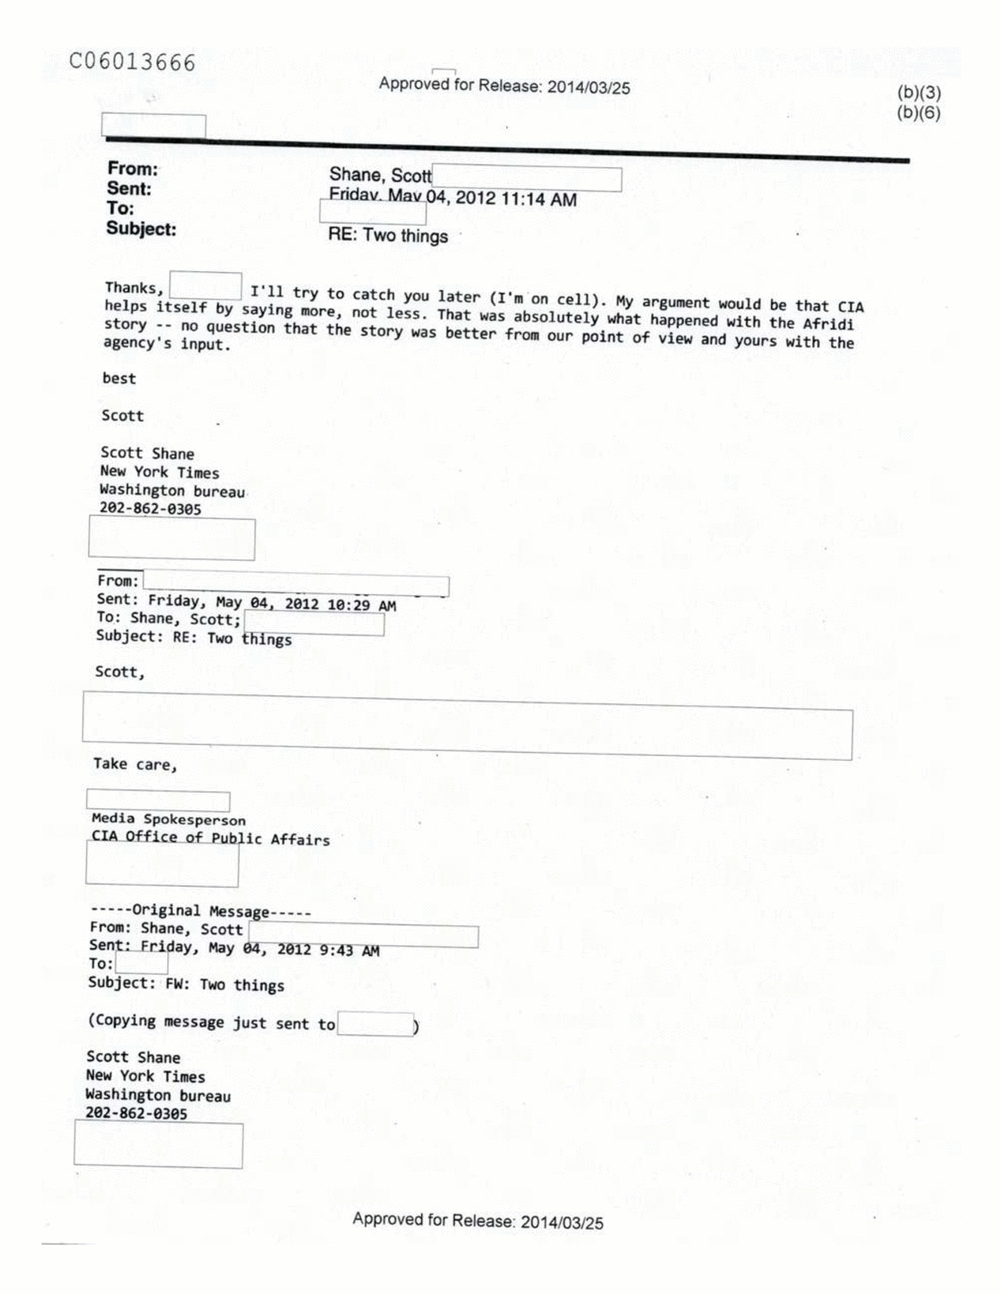 Page 514 from Email Correspondence Between Reporters and CIA Flacks